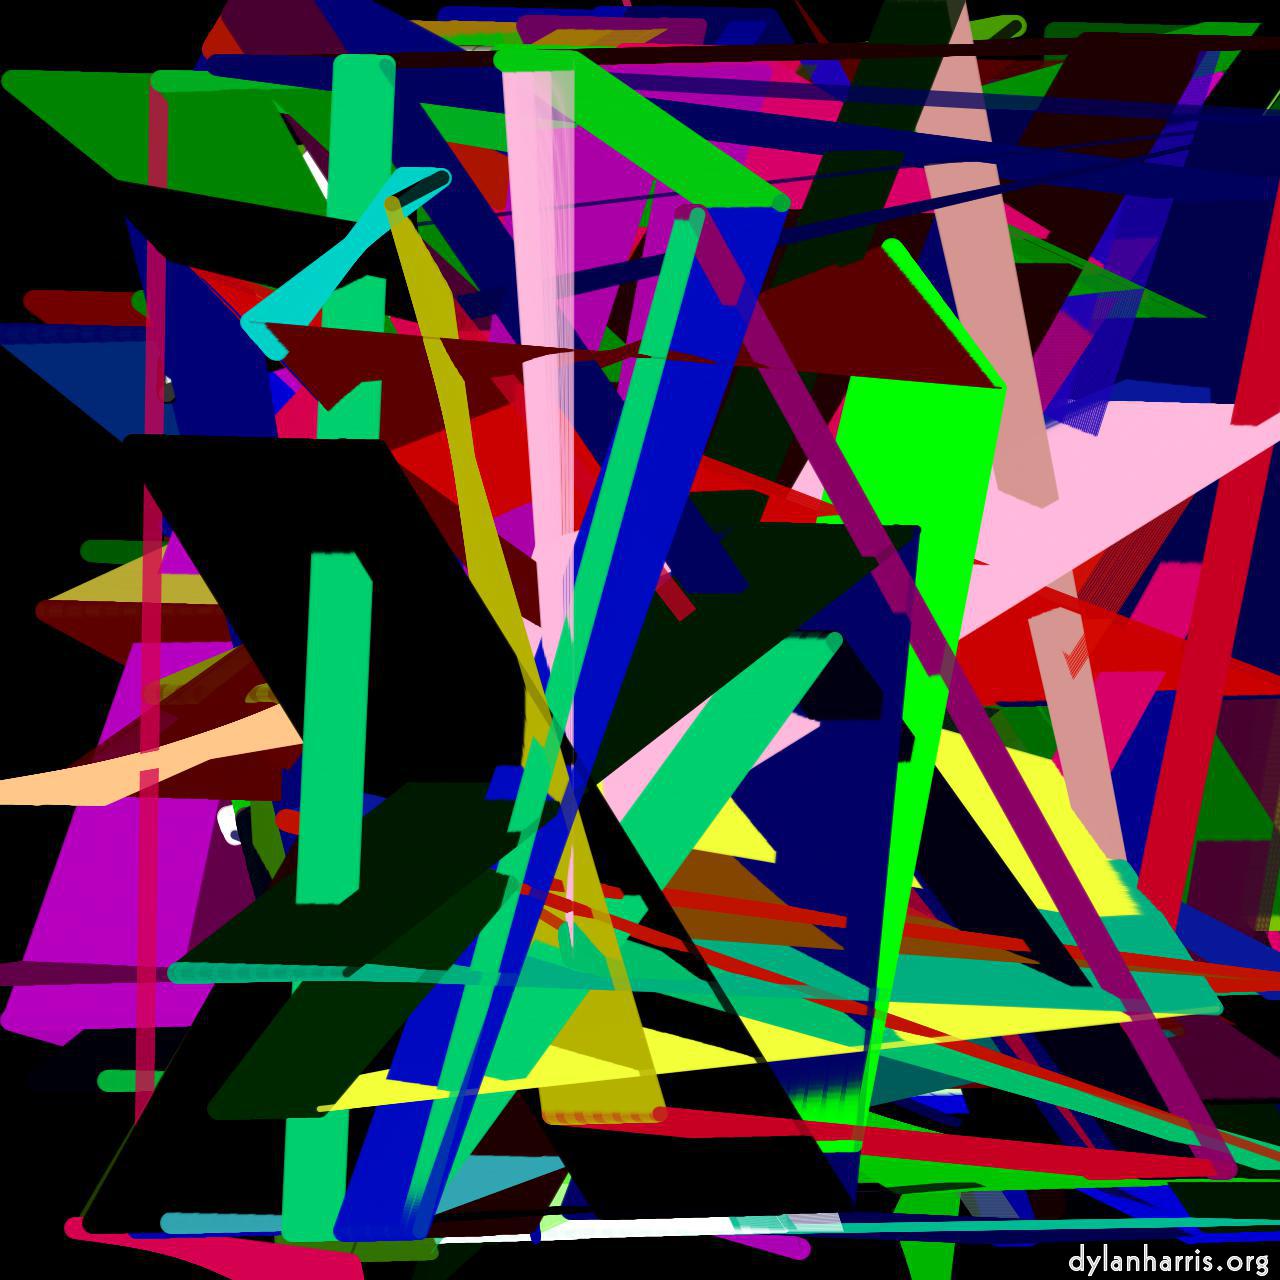 image: interactive spiros - use auto mouse in toolbar :: merging triangles